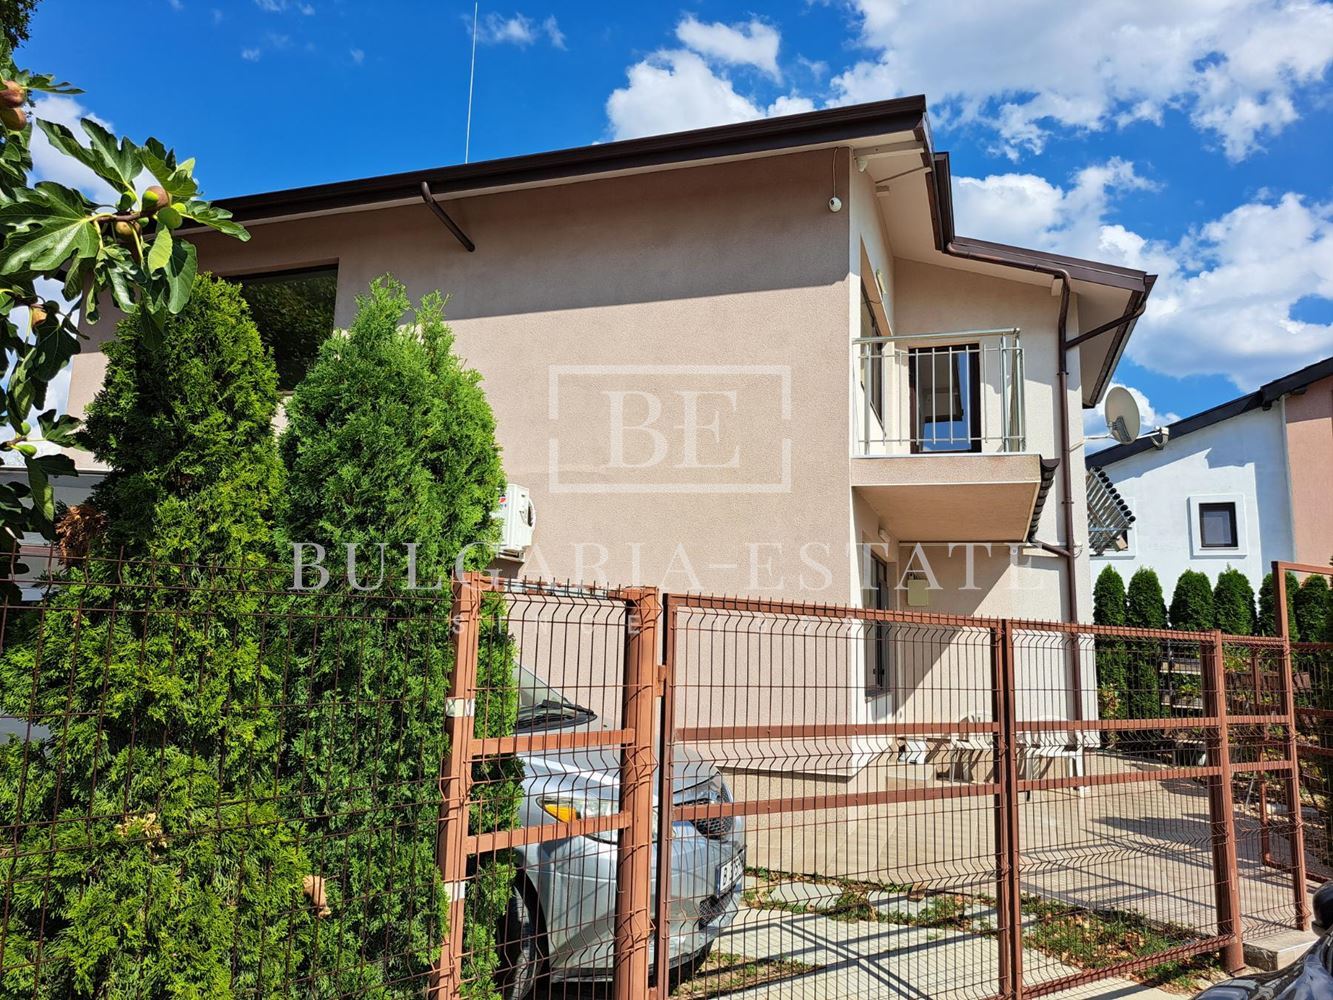 🏡 Two-storey house for sale, ready to move in Mentesheto 🌳" - 0